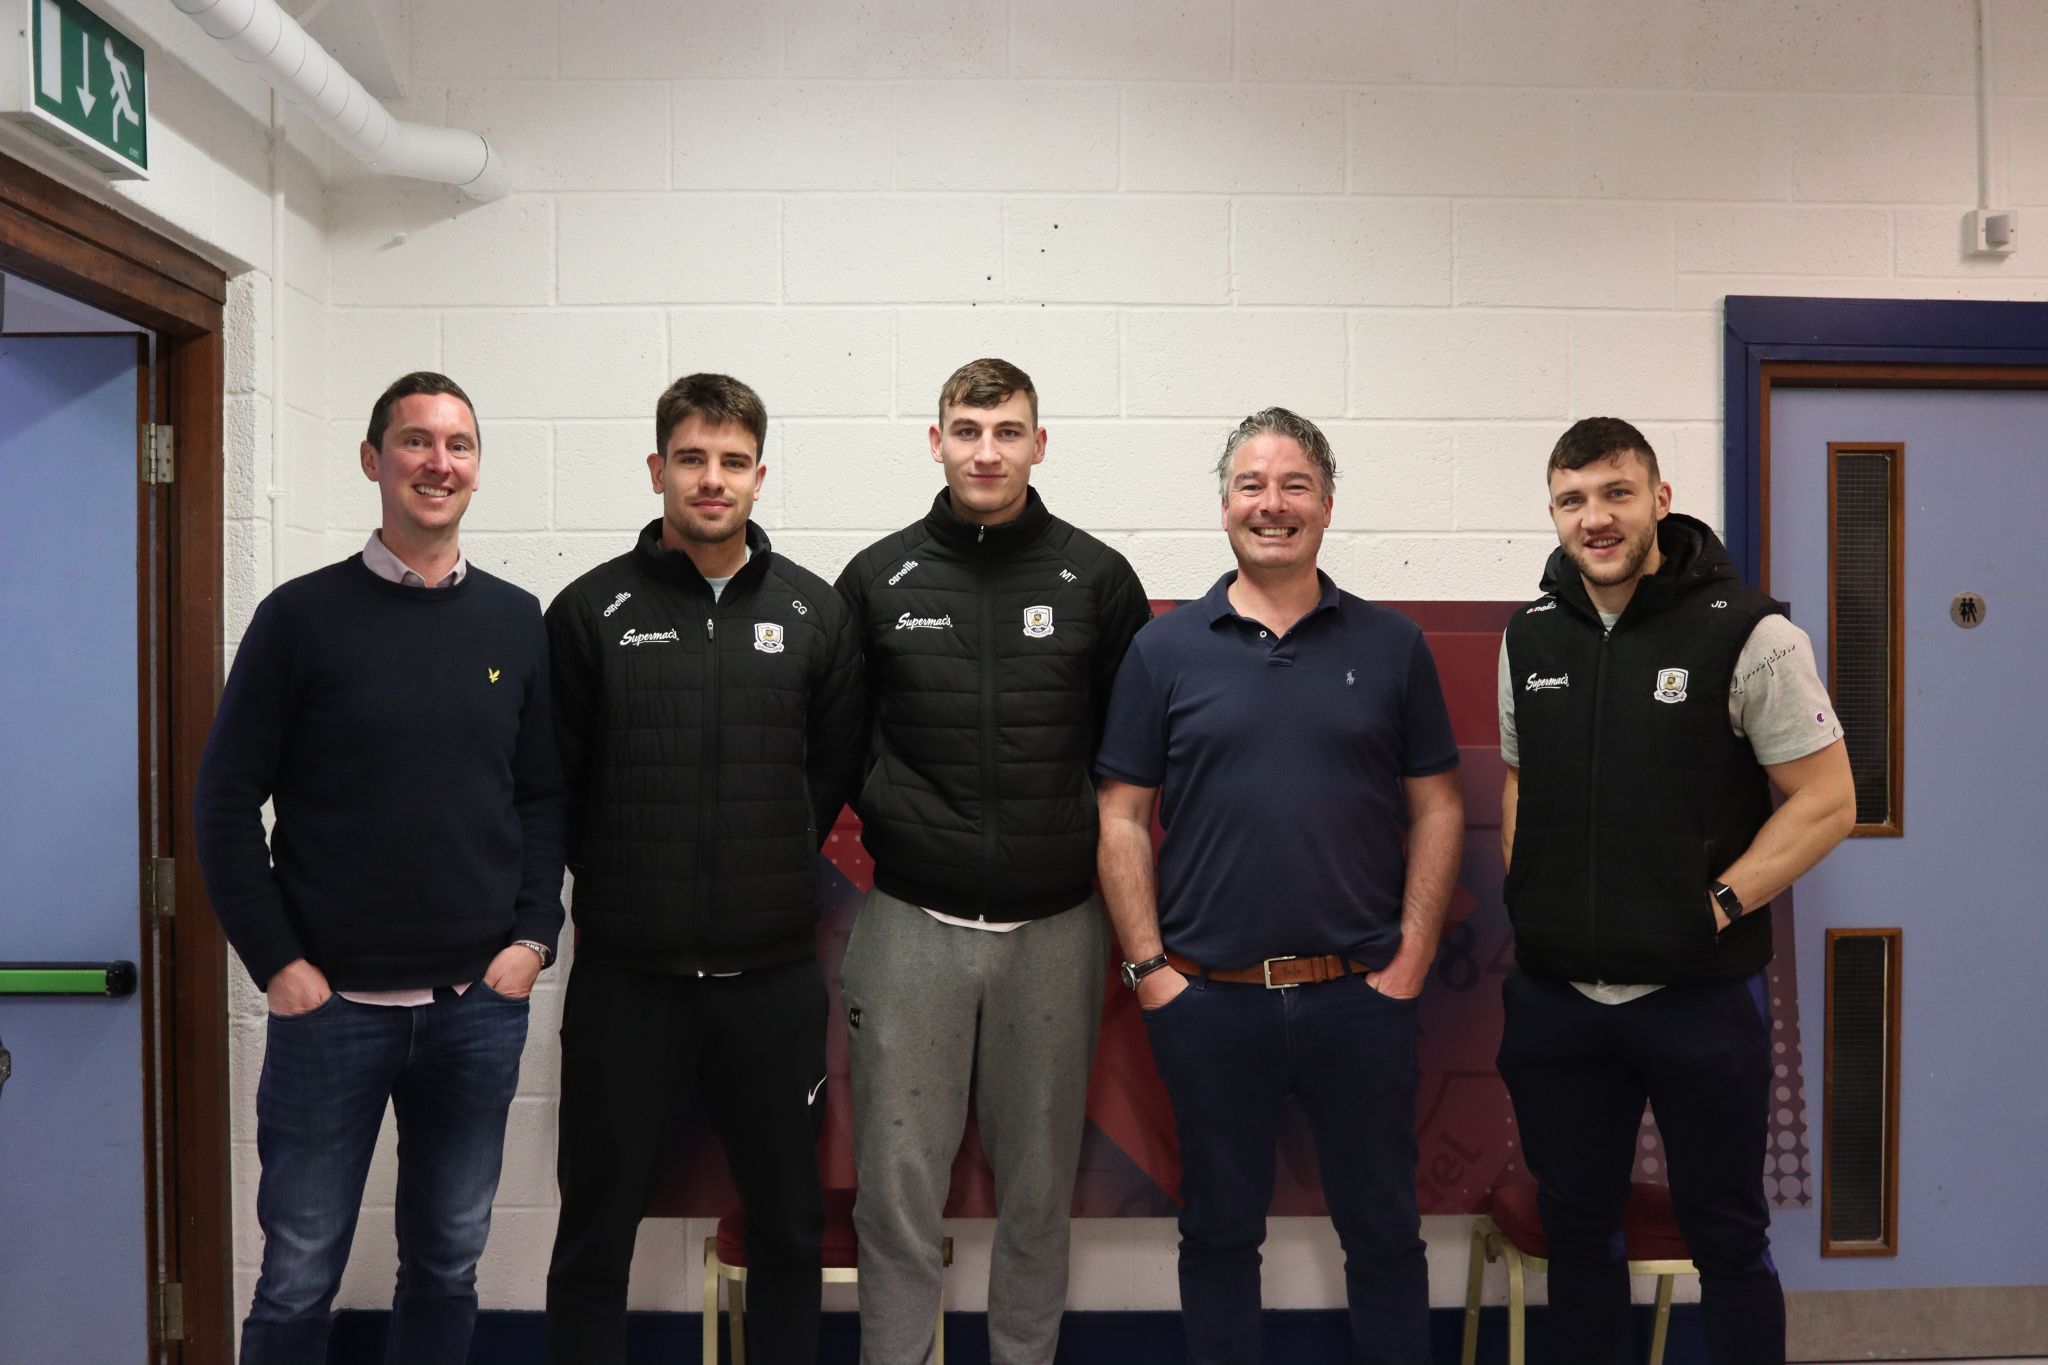 GHR Consulting and Galway GAA Partnership